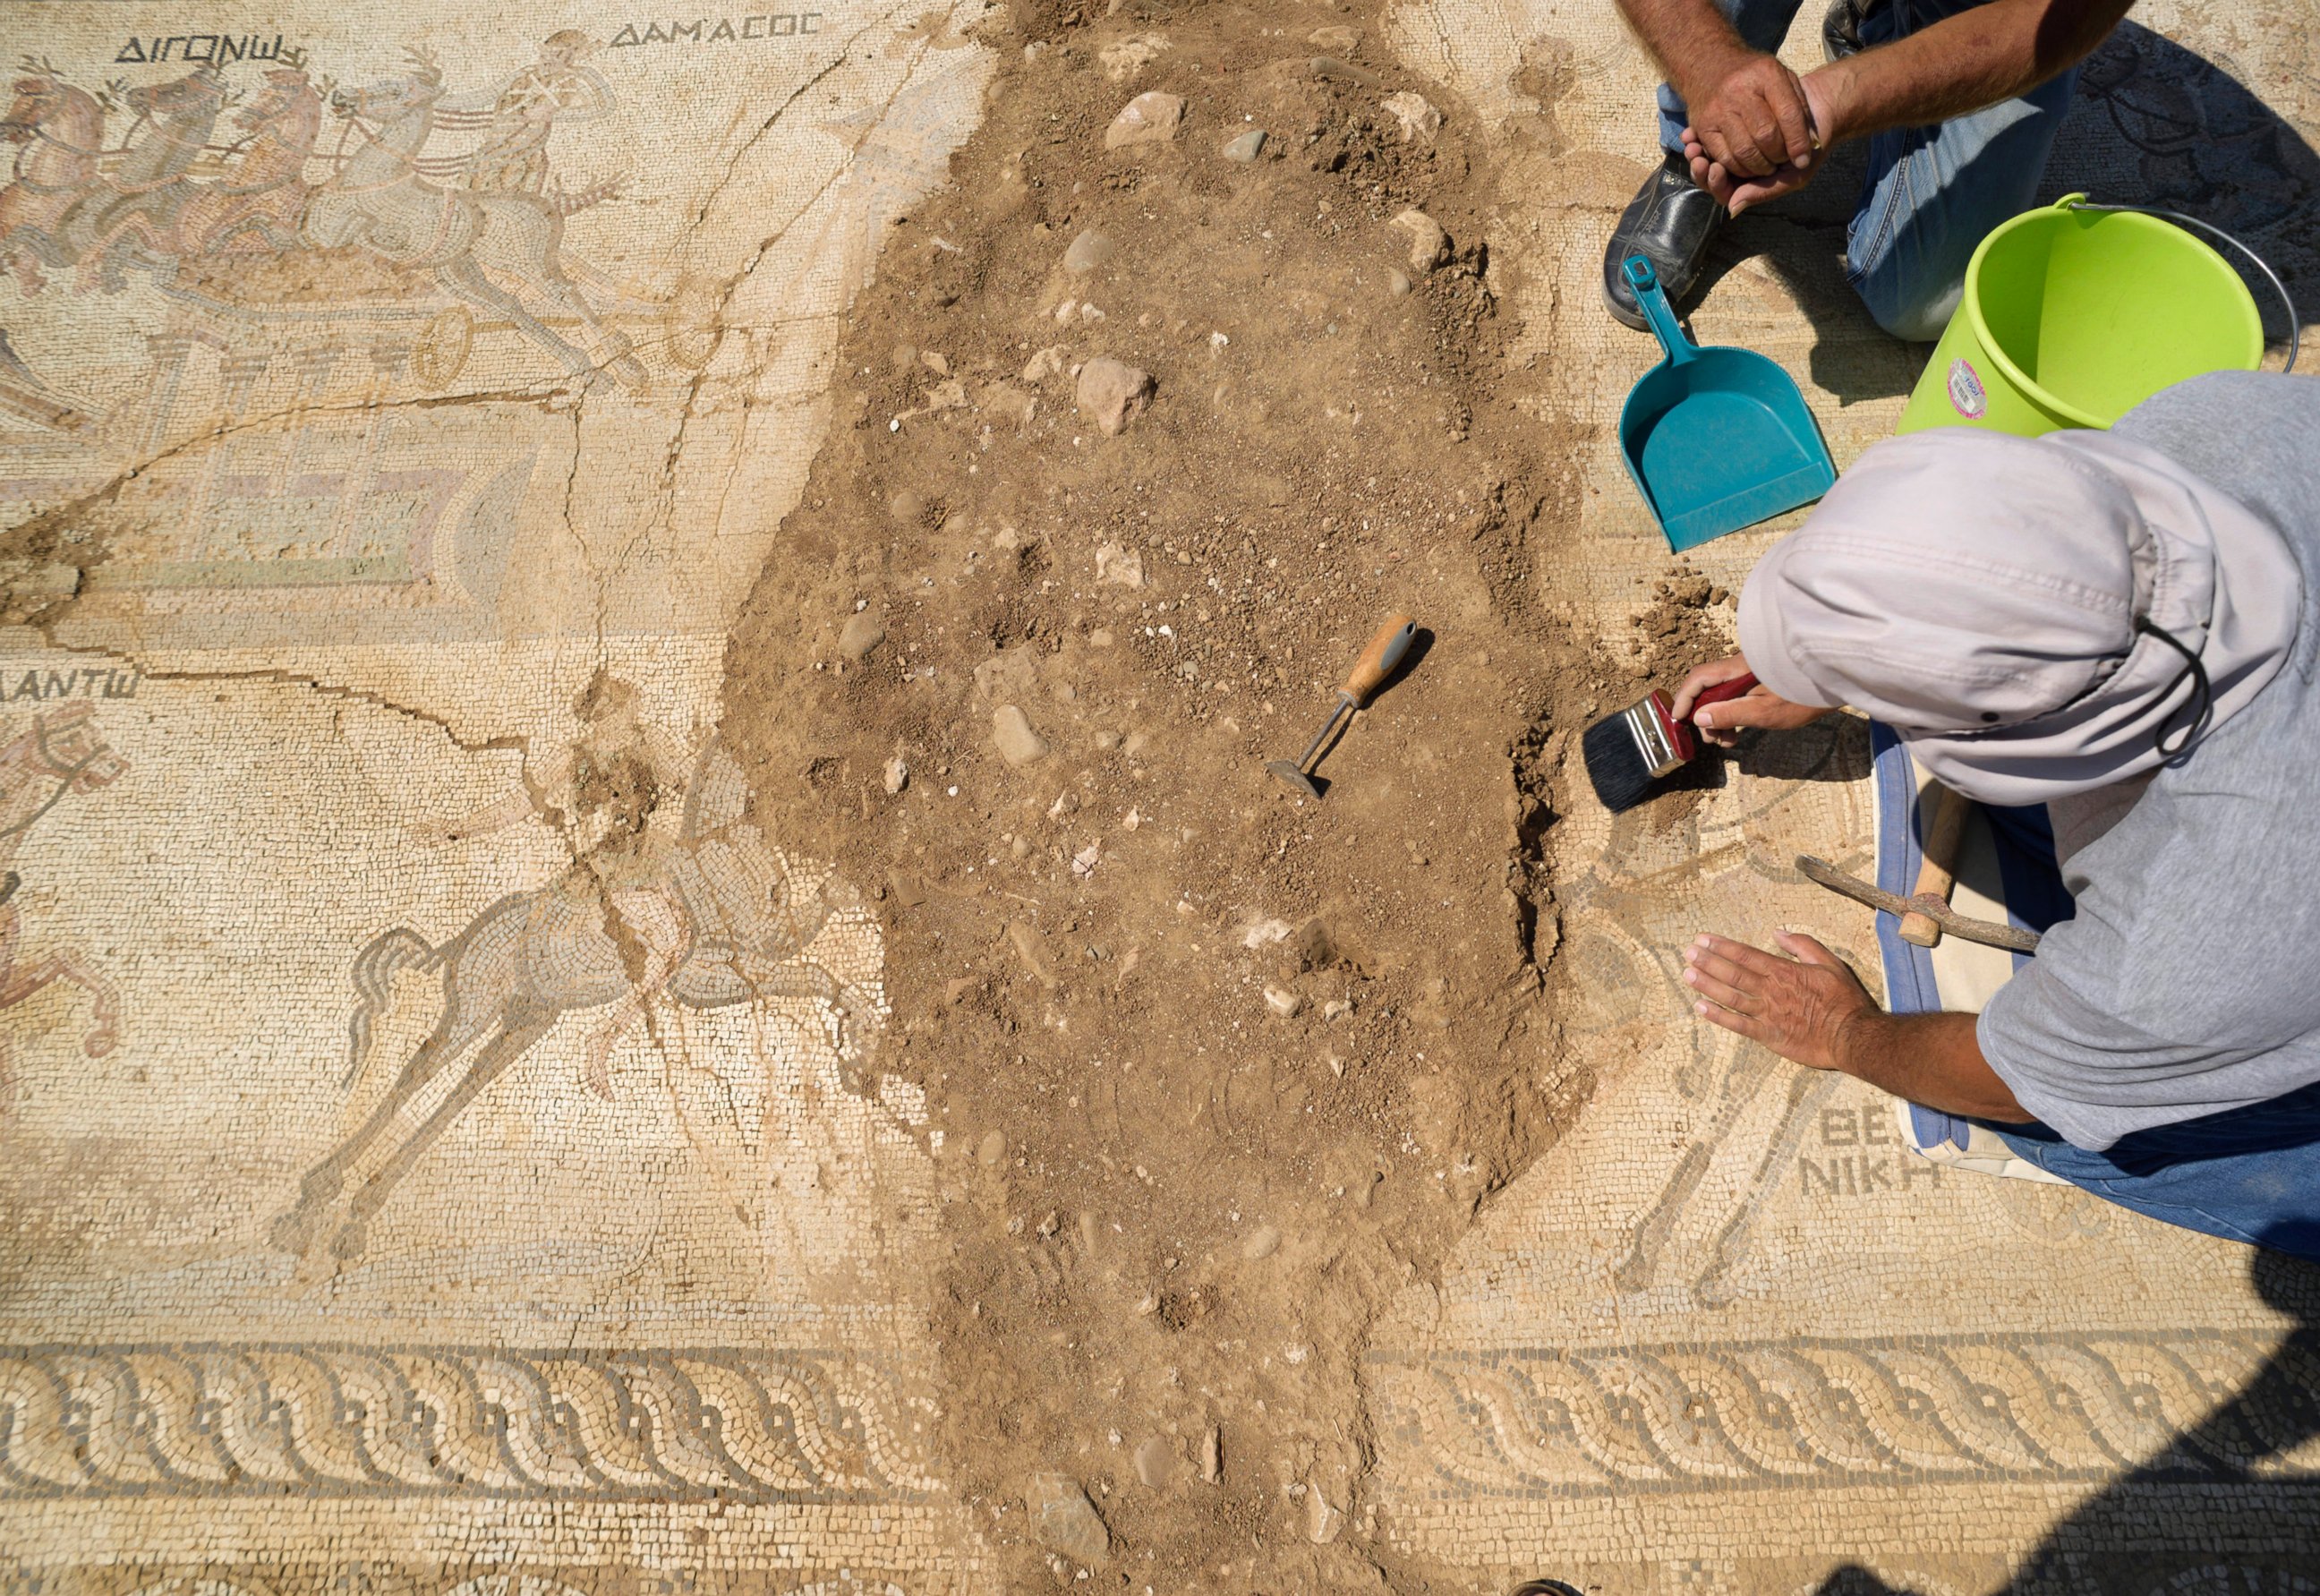 PHOTO: Archeologist work on a rare mosaic floor dating to the 4th century depicting scenes from a chariot race in the hippodrome, in Akaki village outside from capital Nicosia, Cyprus, on Aug. 10, 2016. 